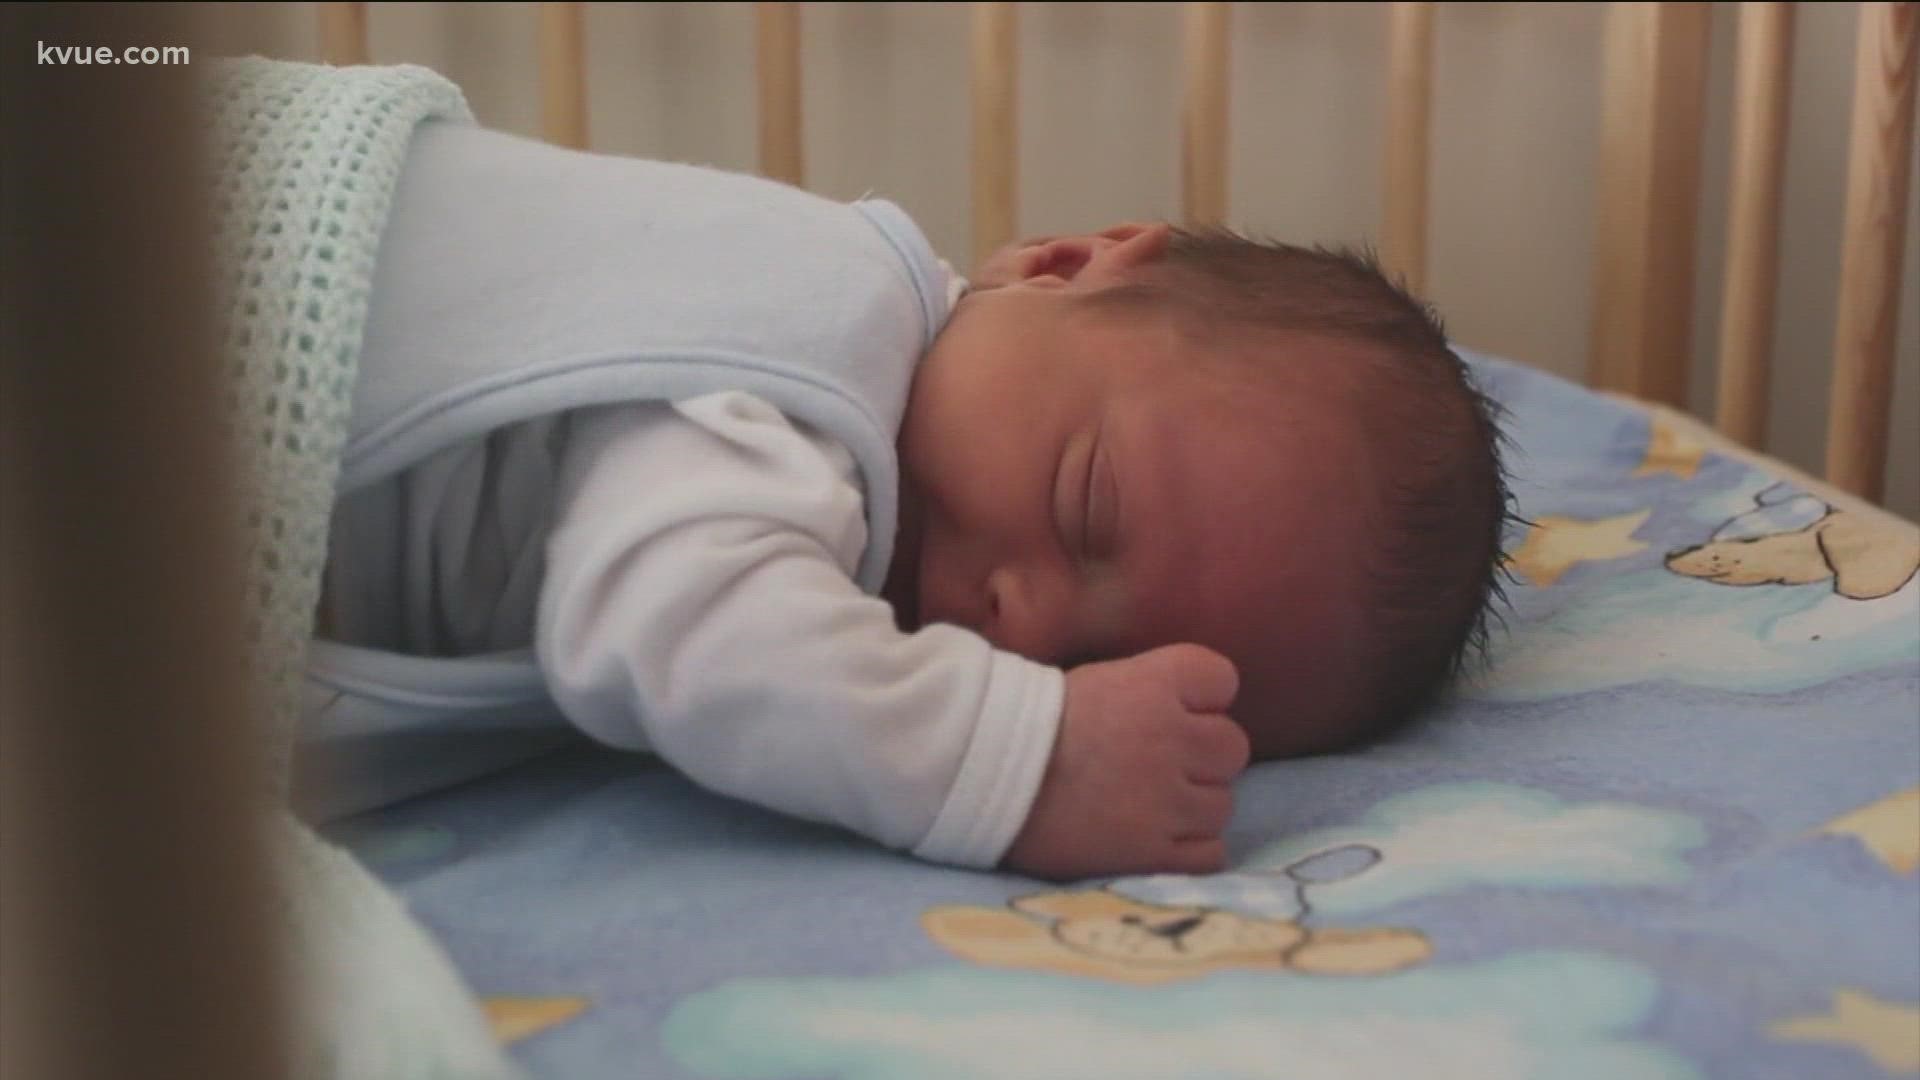 Sudden infant death syndrome, or SIDS, usually happens when infants die in their sleep without any particular reason. Researchers say they now know a cause.